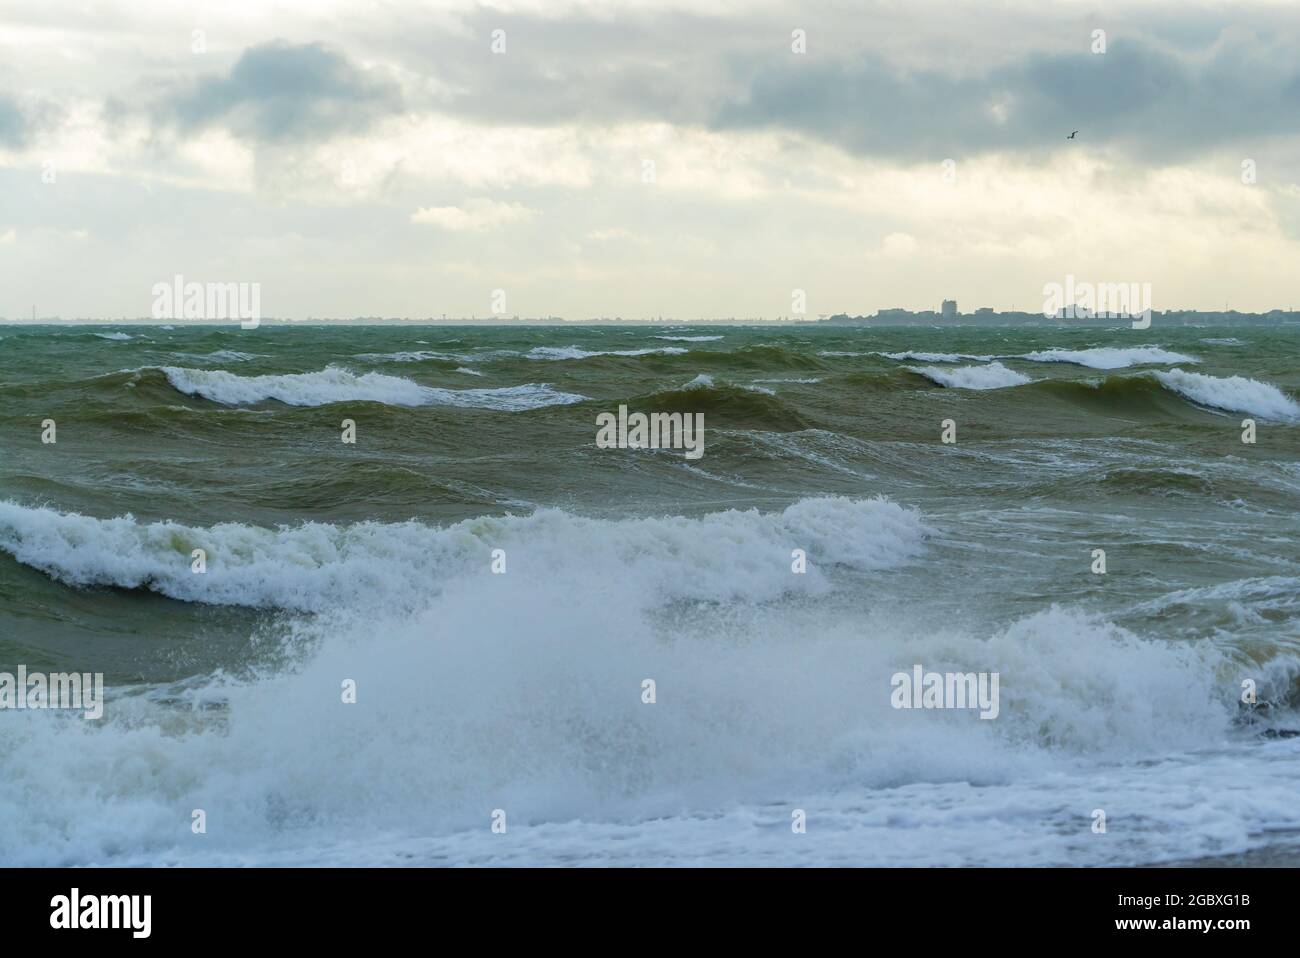 Big waves on the Black Sea. A storm off the coast of Yevpatoria .The Black Sea coast of Crimea. Stock Photo